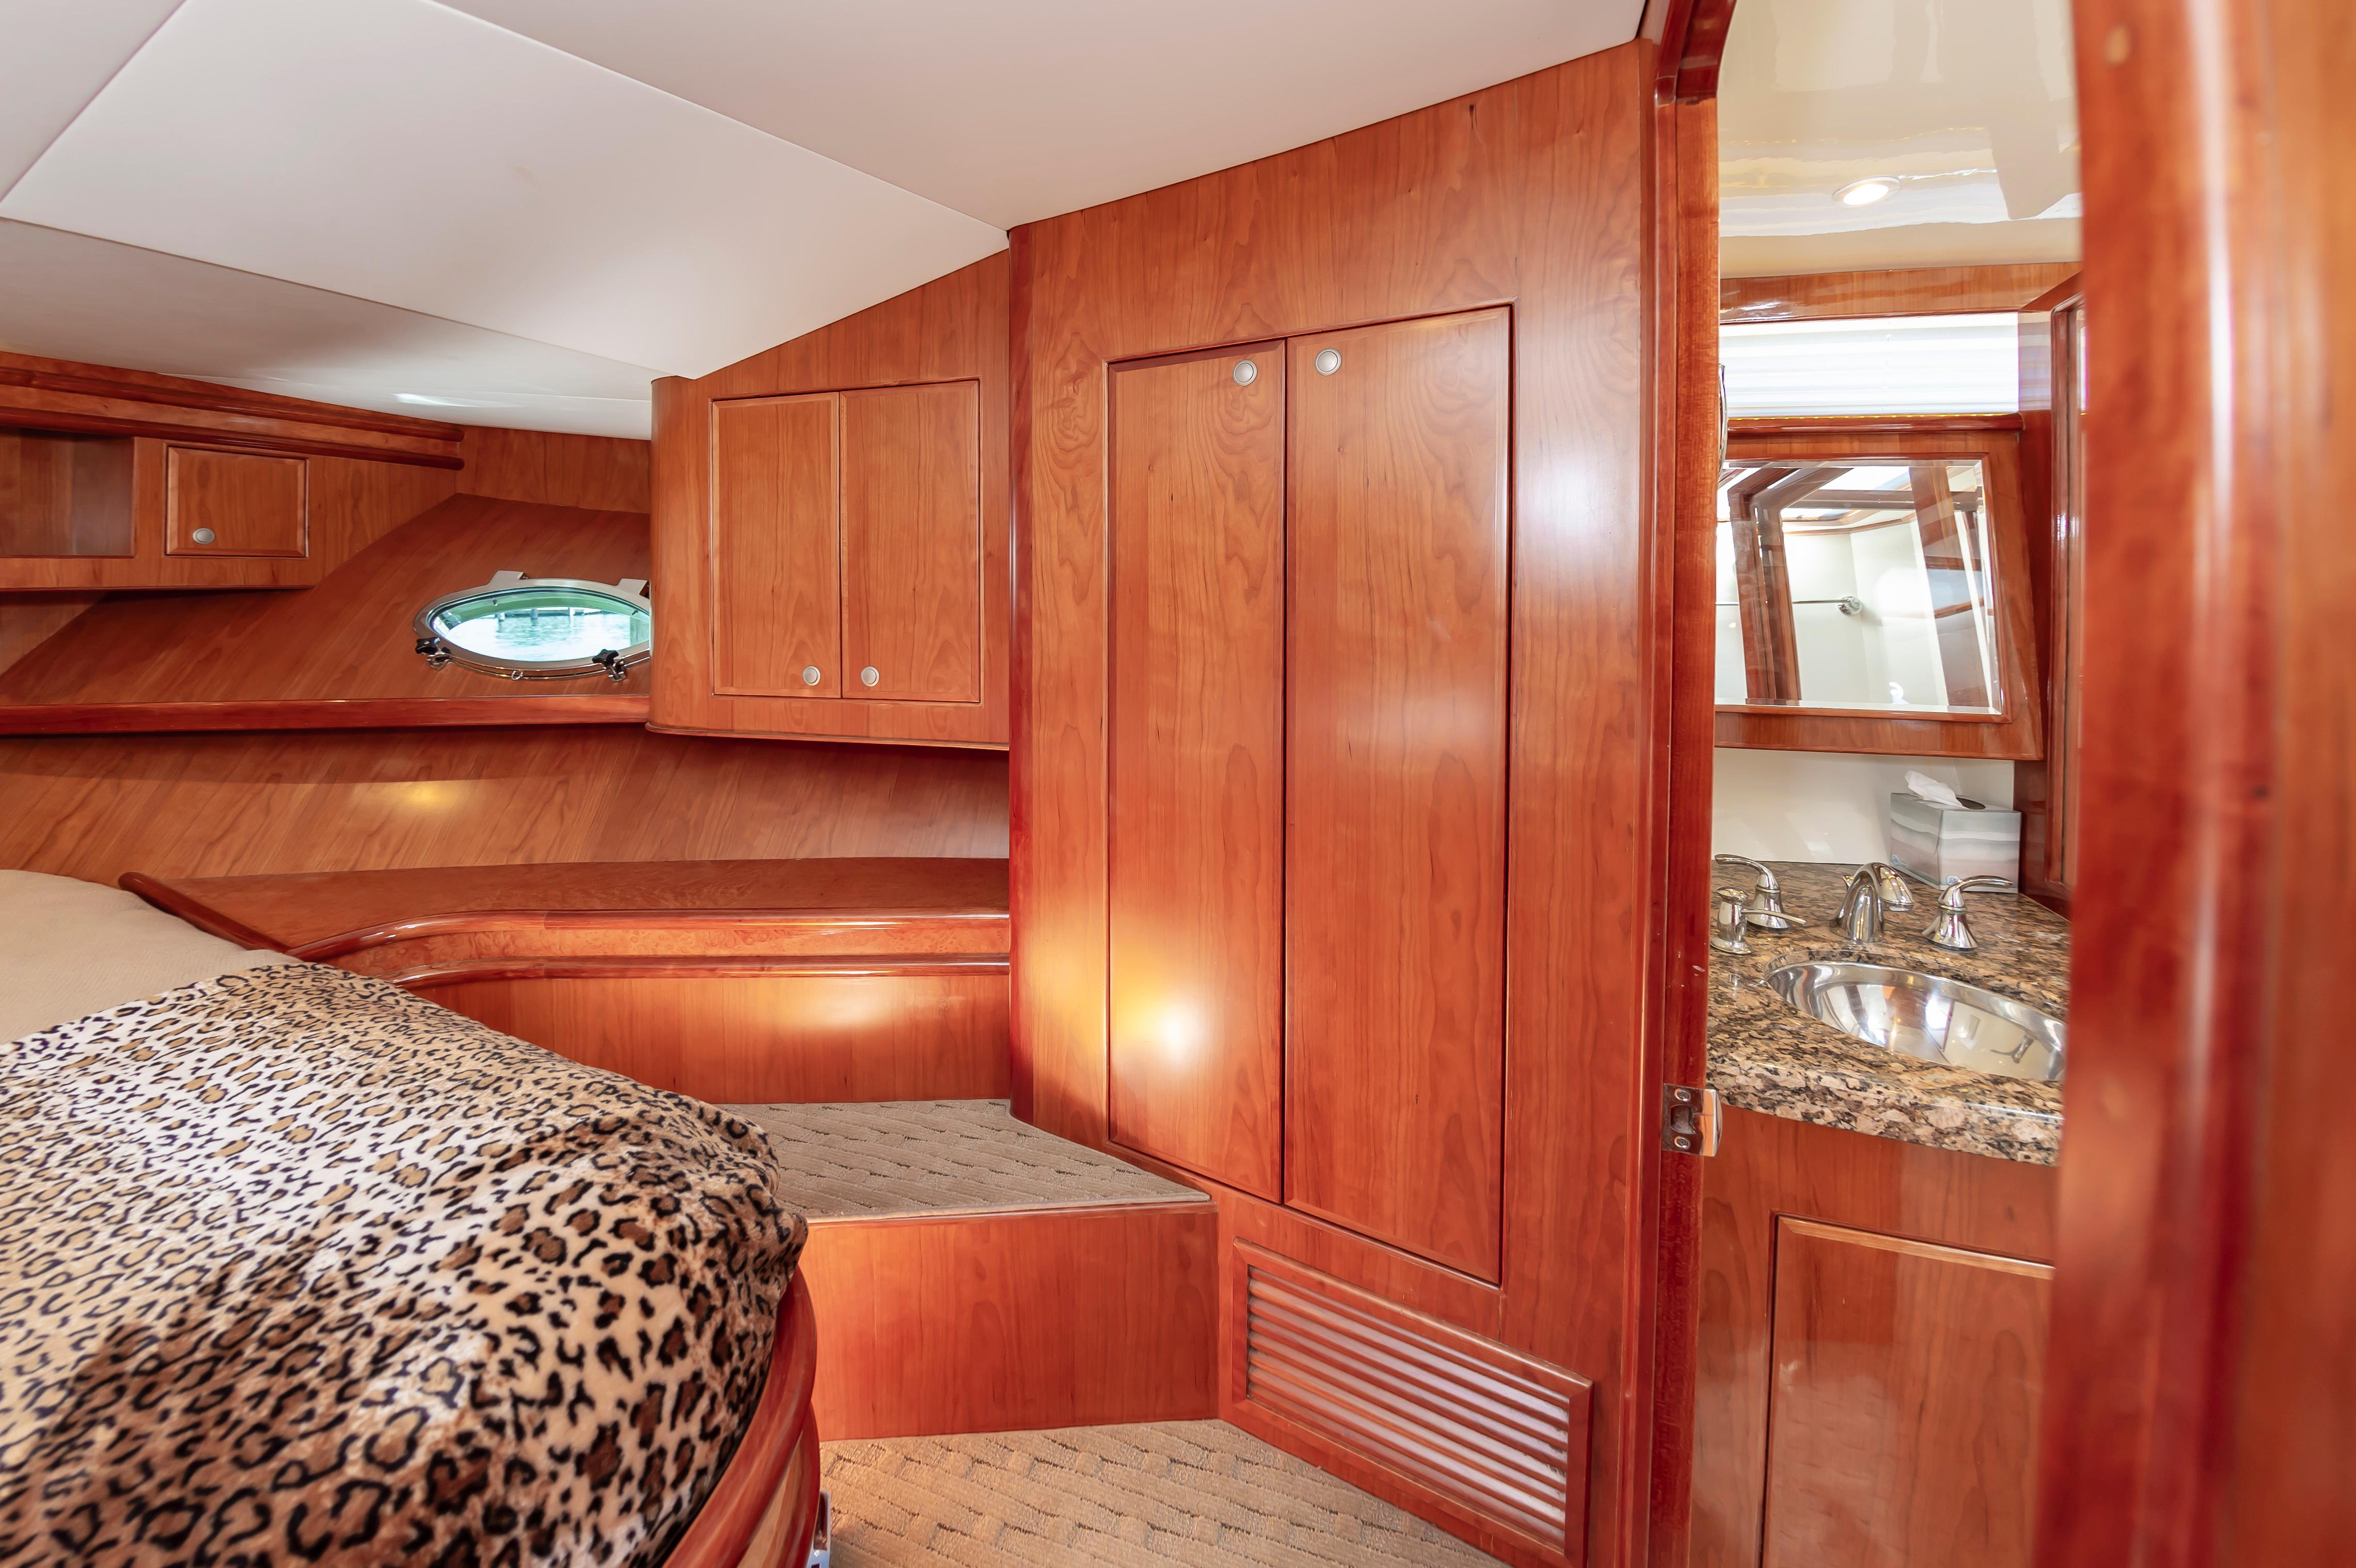 2016 Mikelson 50' S/F, Master Stateroom looking into Ensuite Head/Shower